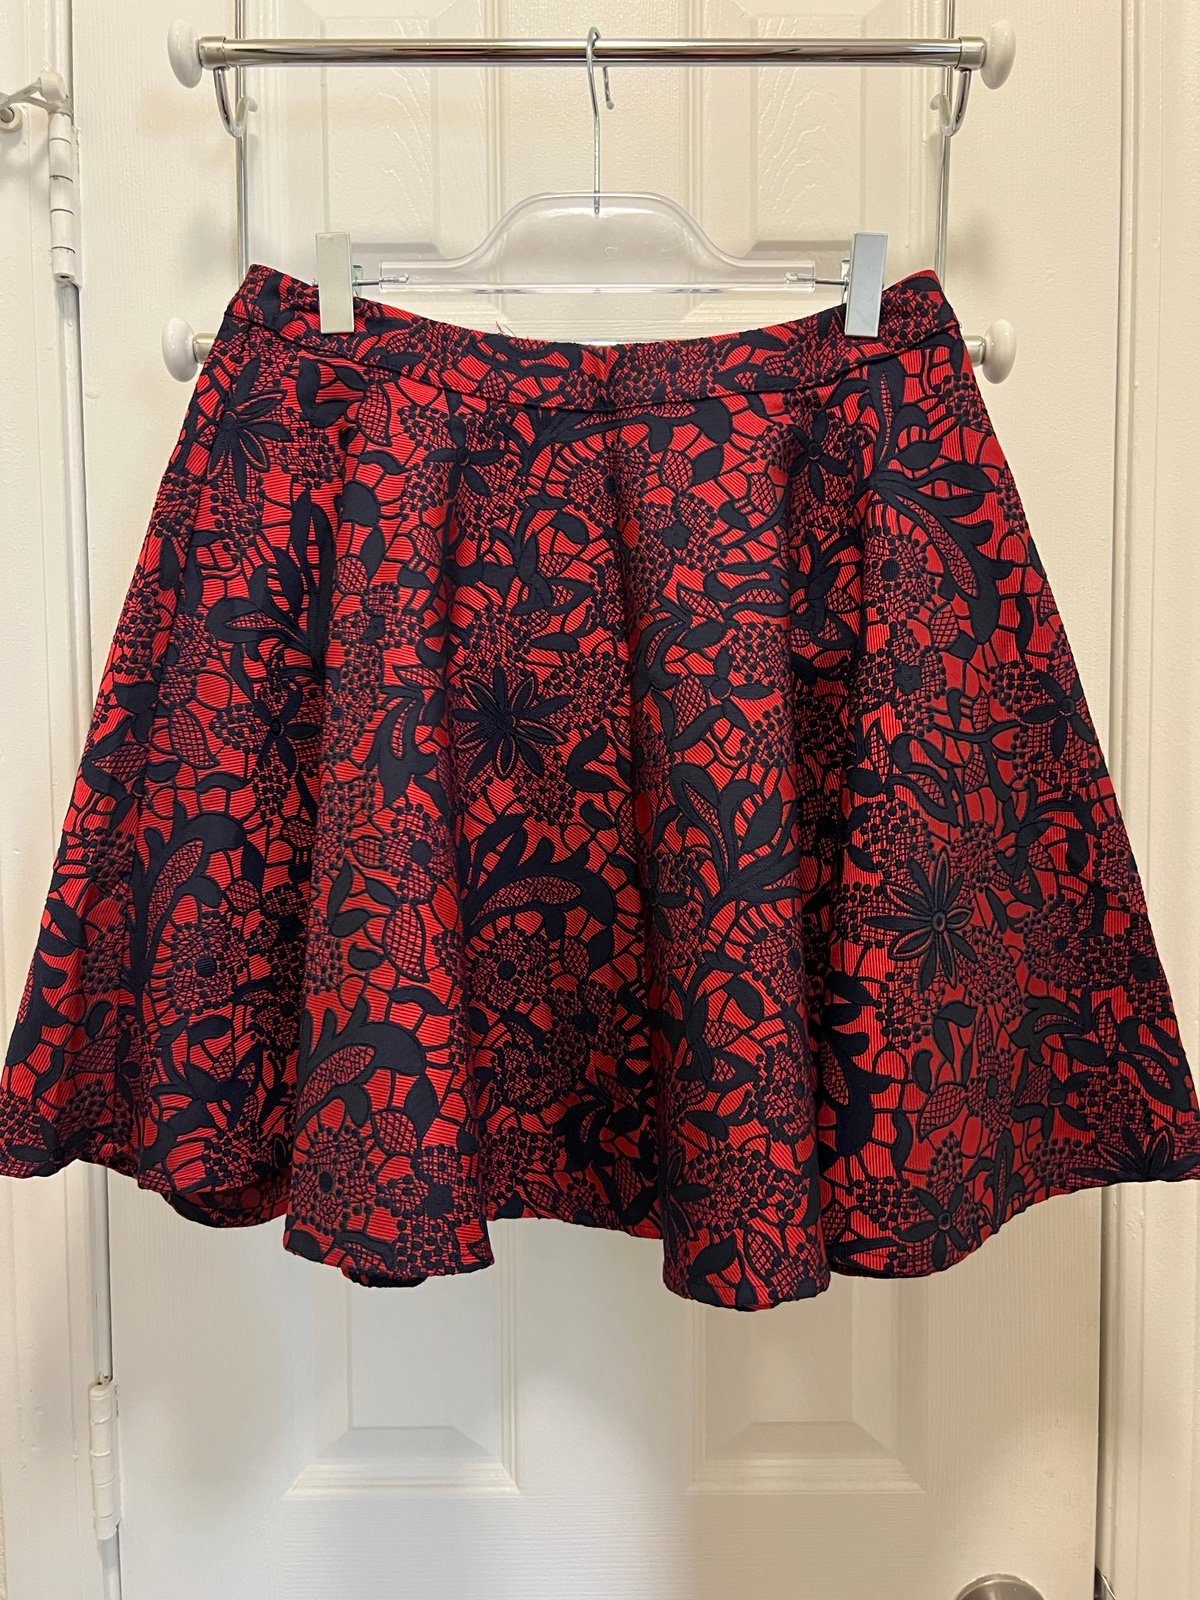 Promotions  Embroidered Circle Skirt jqoFhOMXg Discount